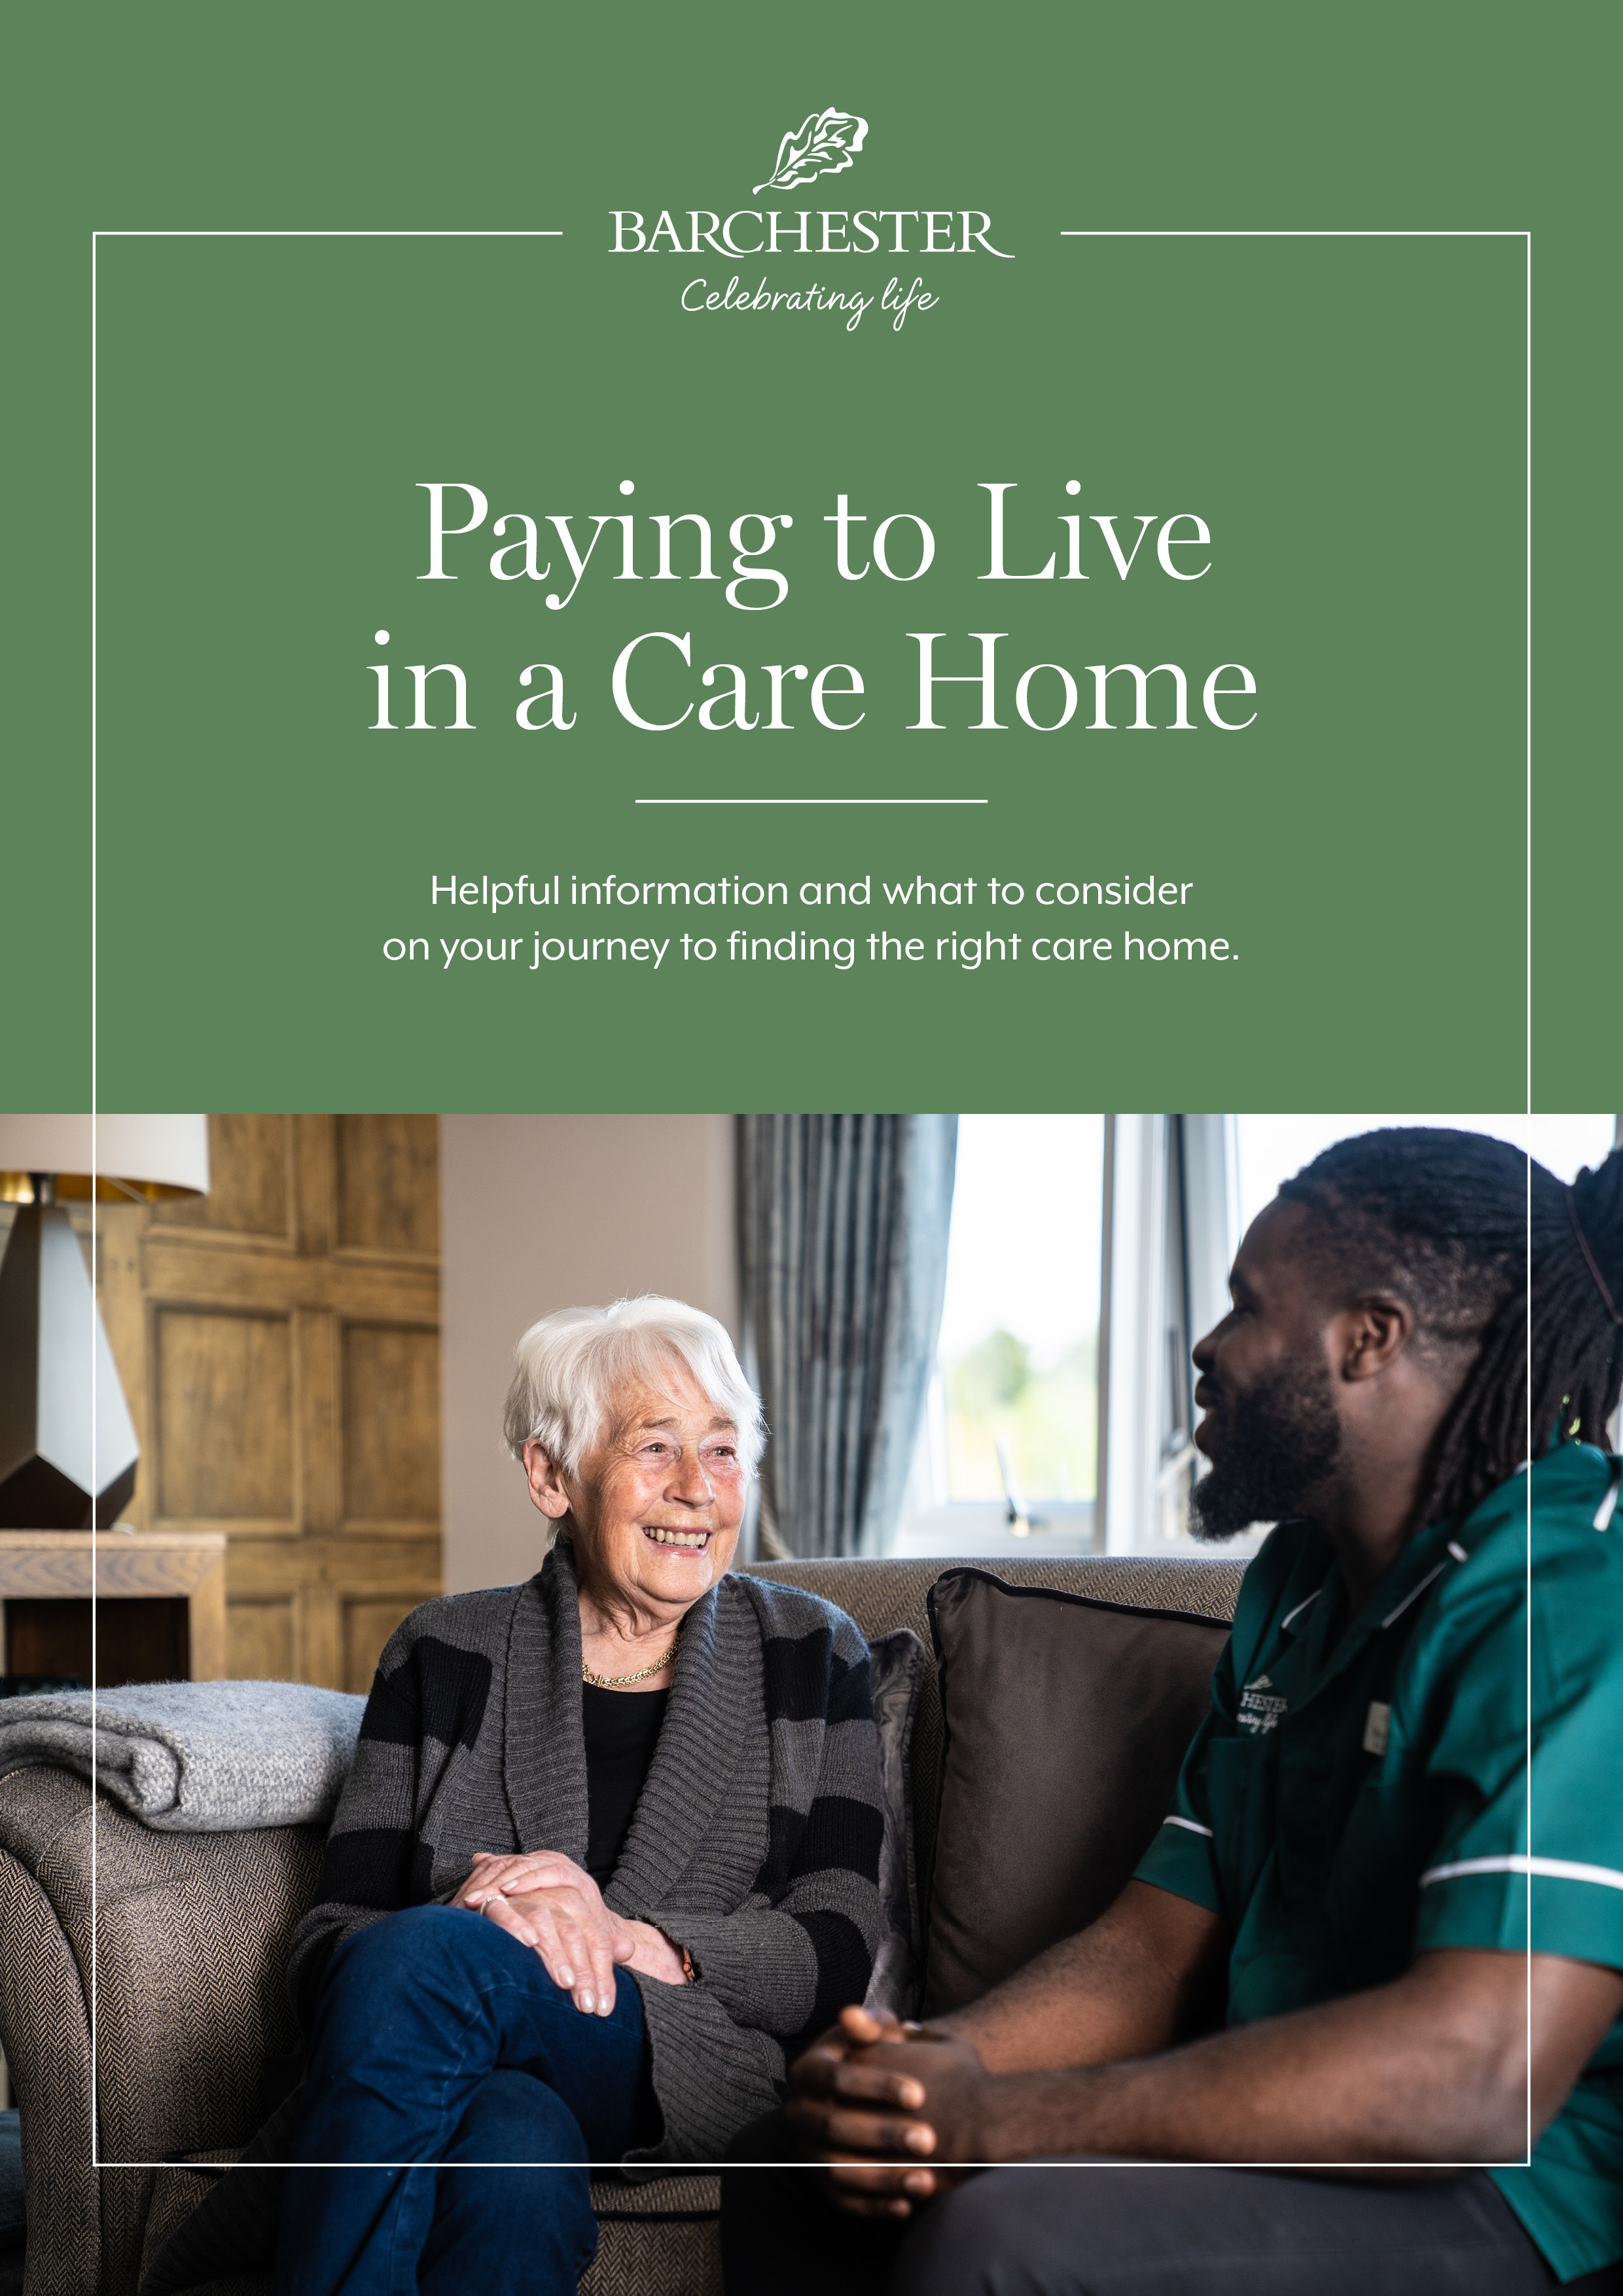 Paying to live in a care home booklet